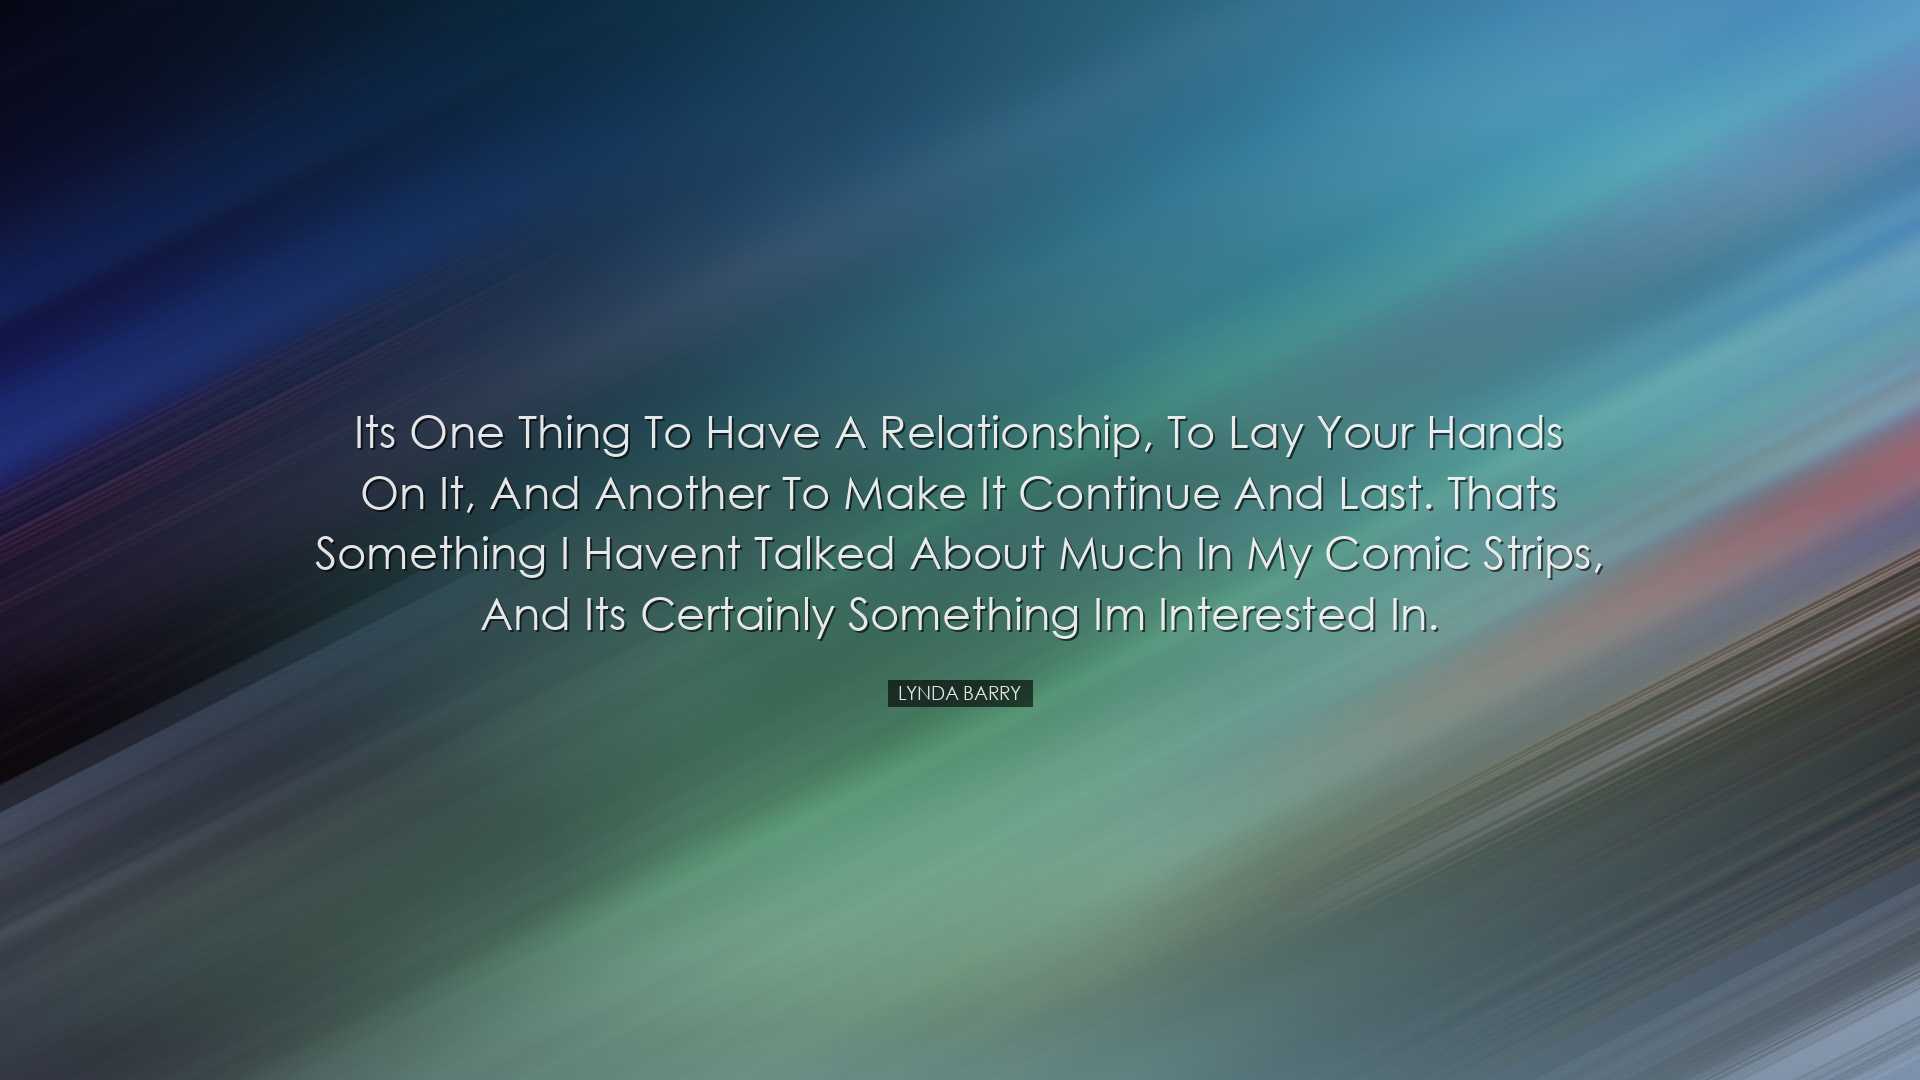 Its one thing to have a relationship, to lay your hands on it, and